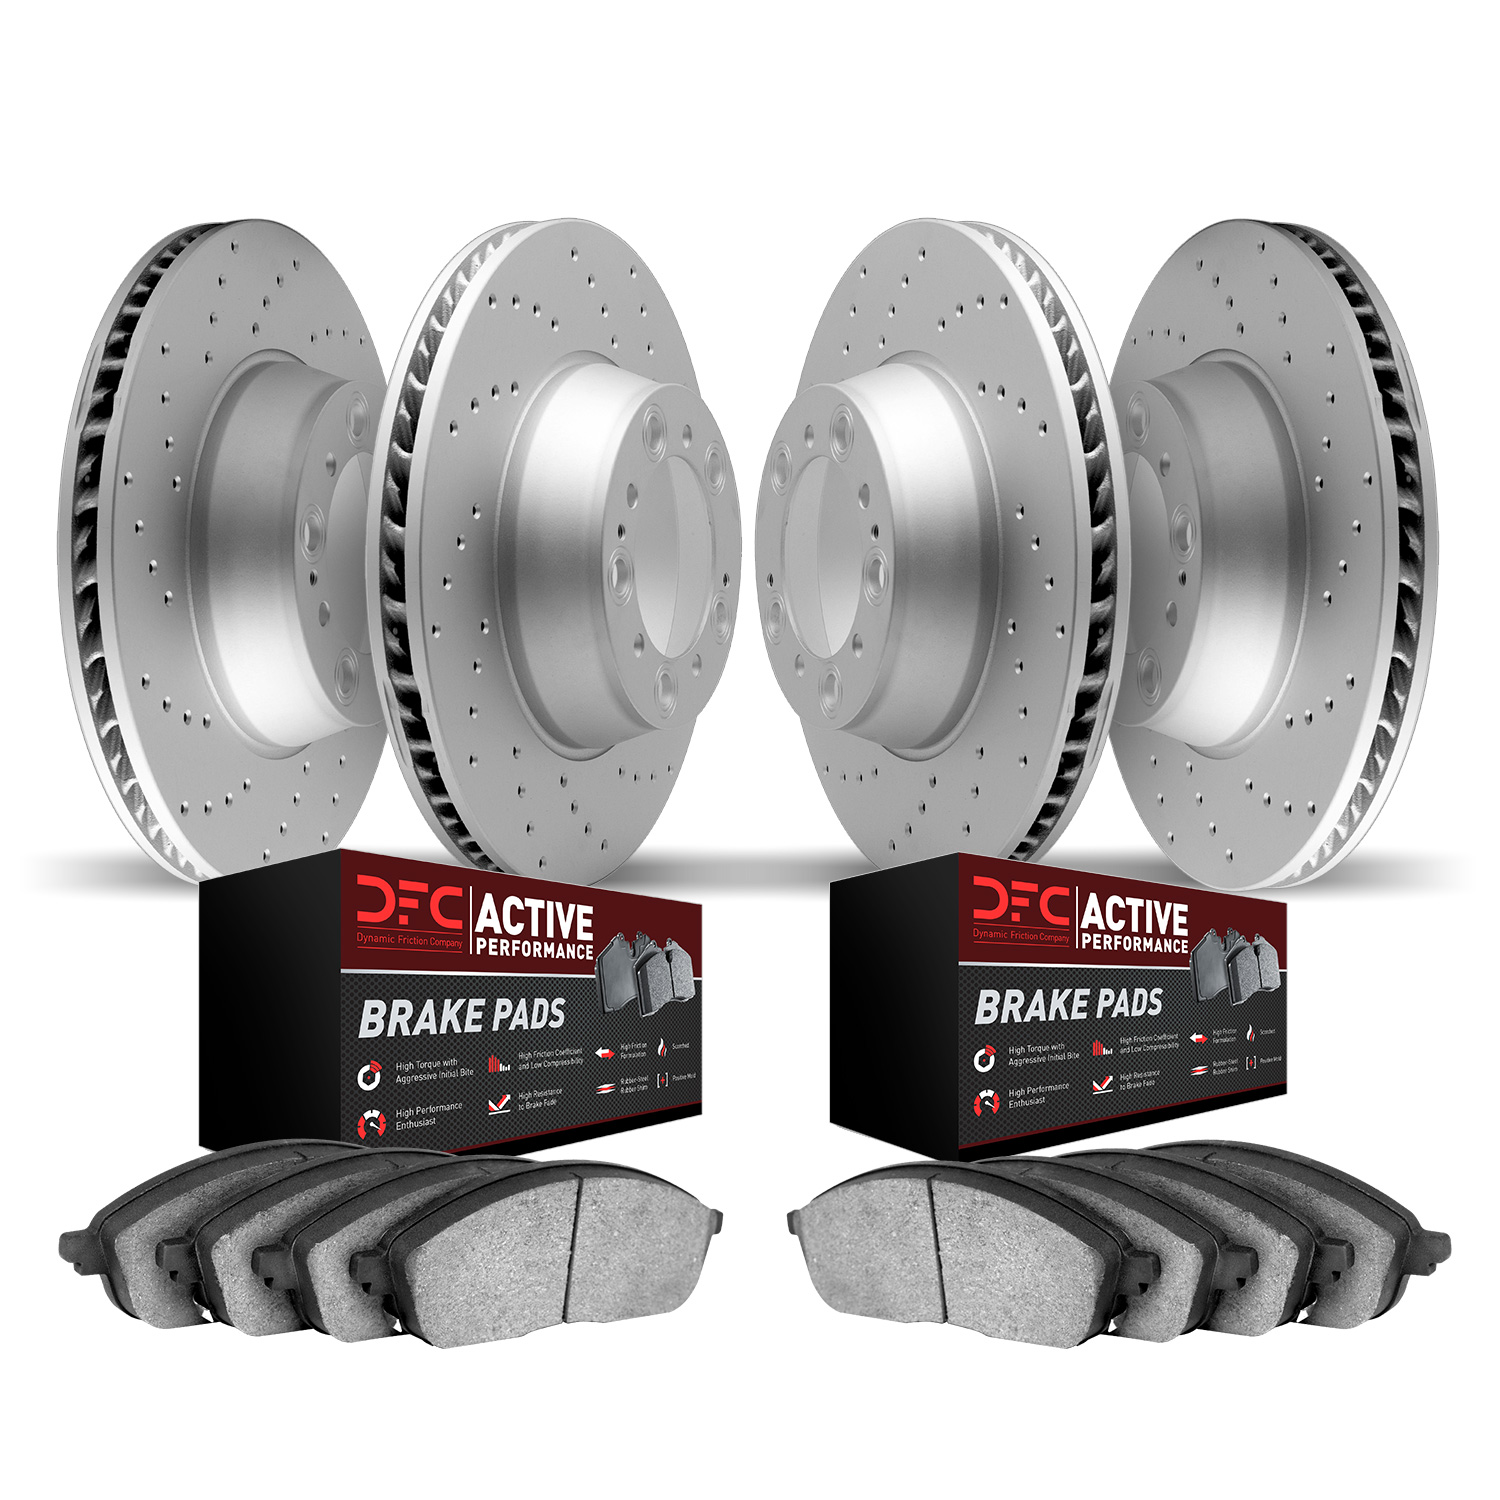 2704-31106 Geoperformance Drilled Brake Rotors with Active Performance Pads Kit, 2011-2016 BMW, Position: Front and Rear